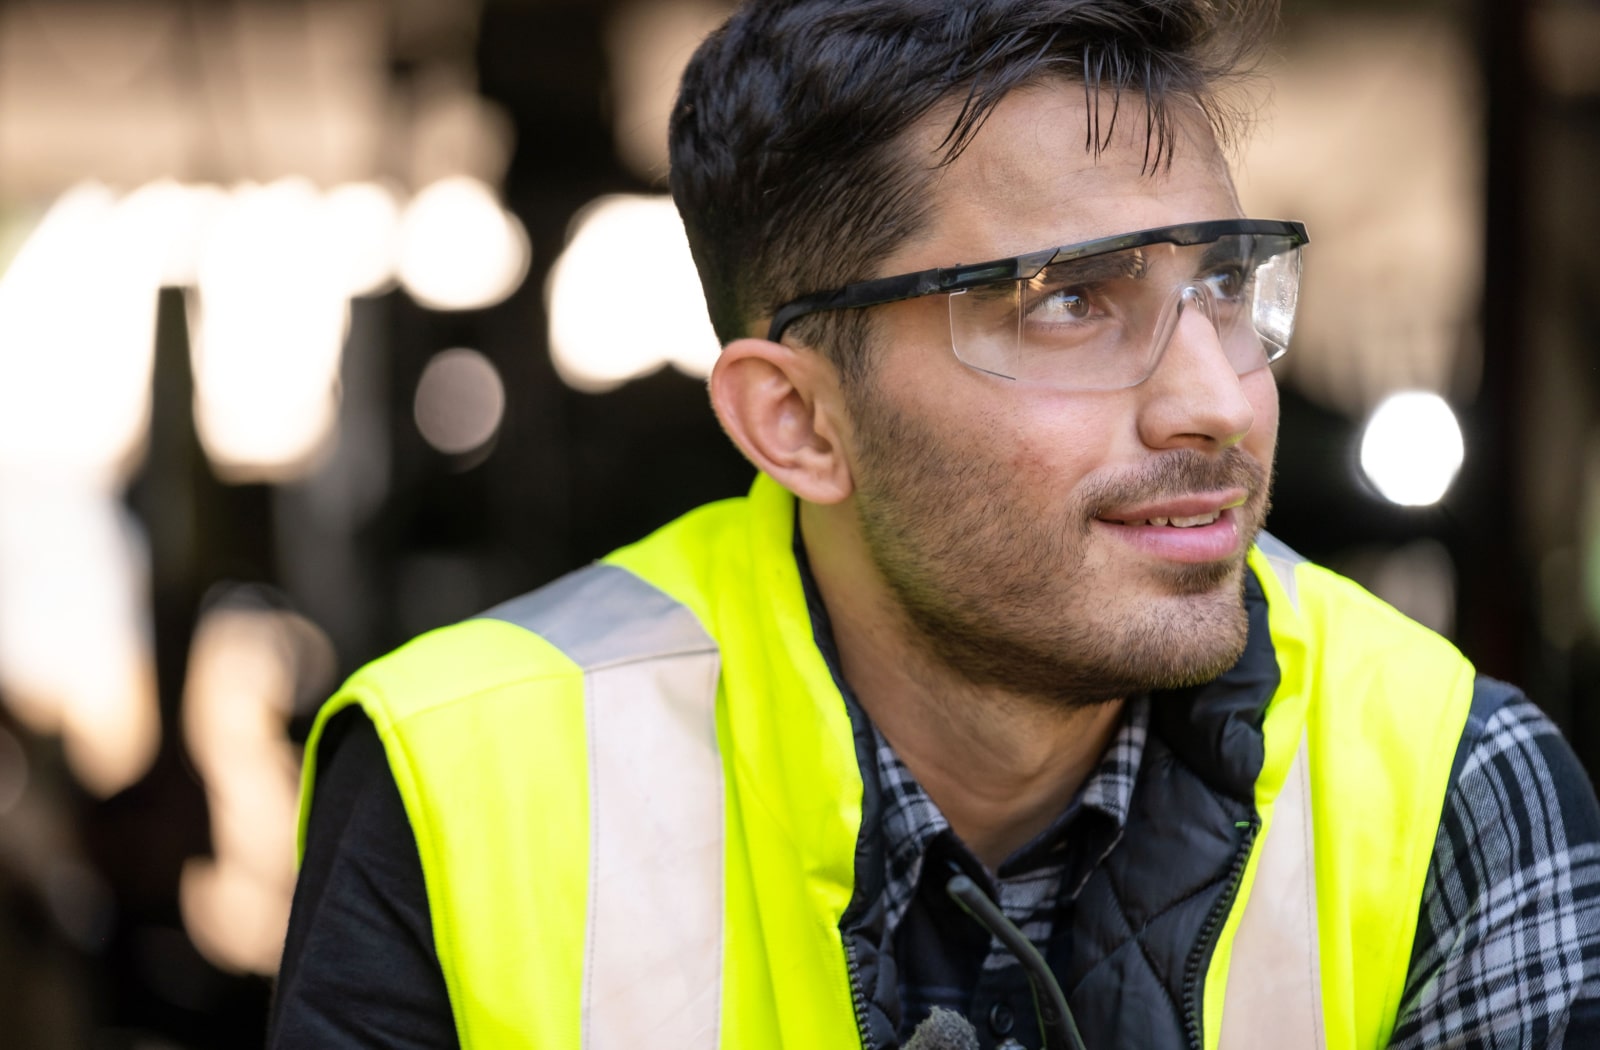 A man wearing a yellow safety vest and safety glasses at his job.